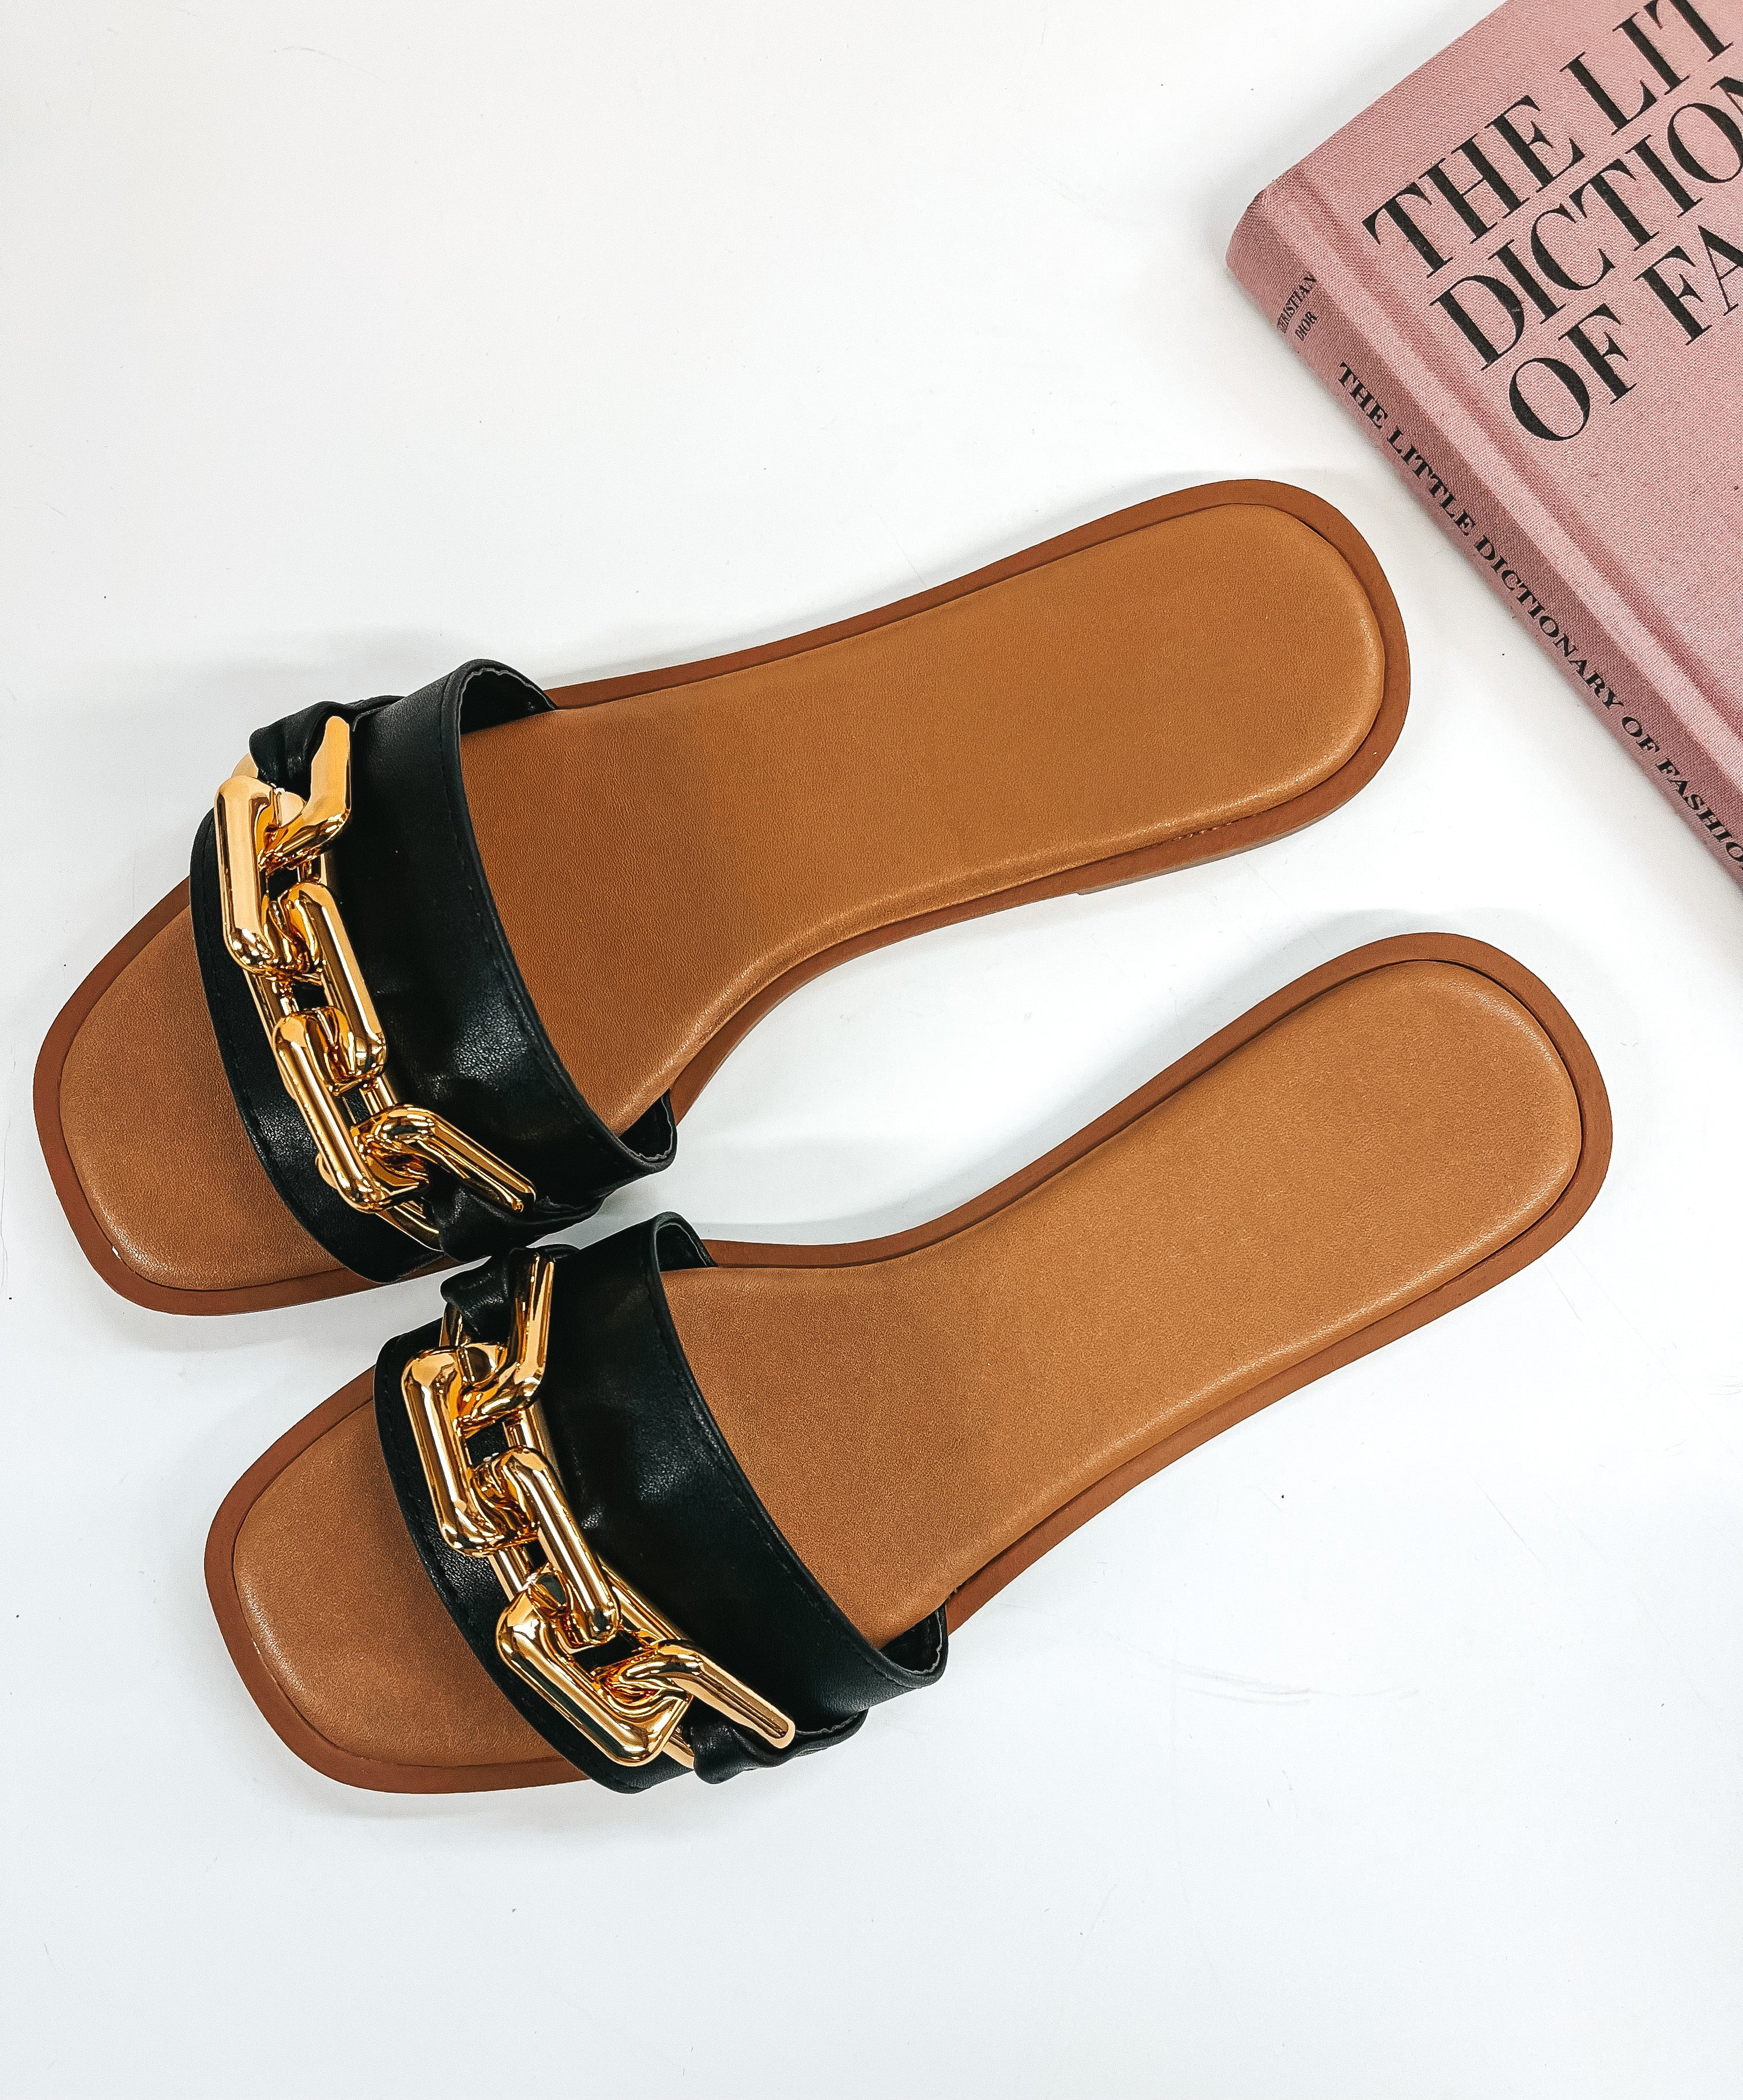 Resort Vibes Slide On Sandals with Gold Chain in Black - Giddy Up Glamour Boutique